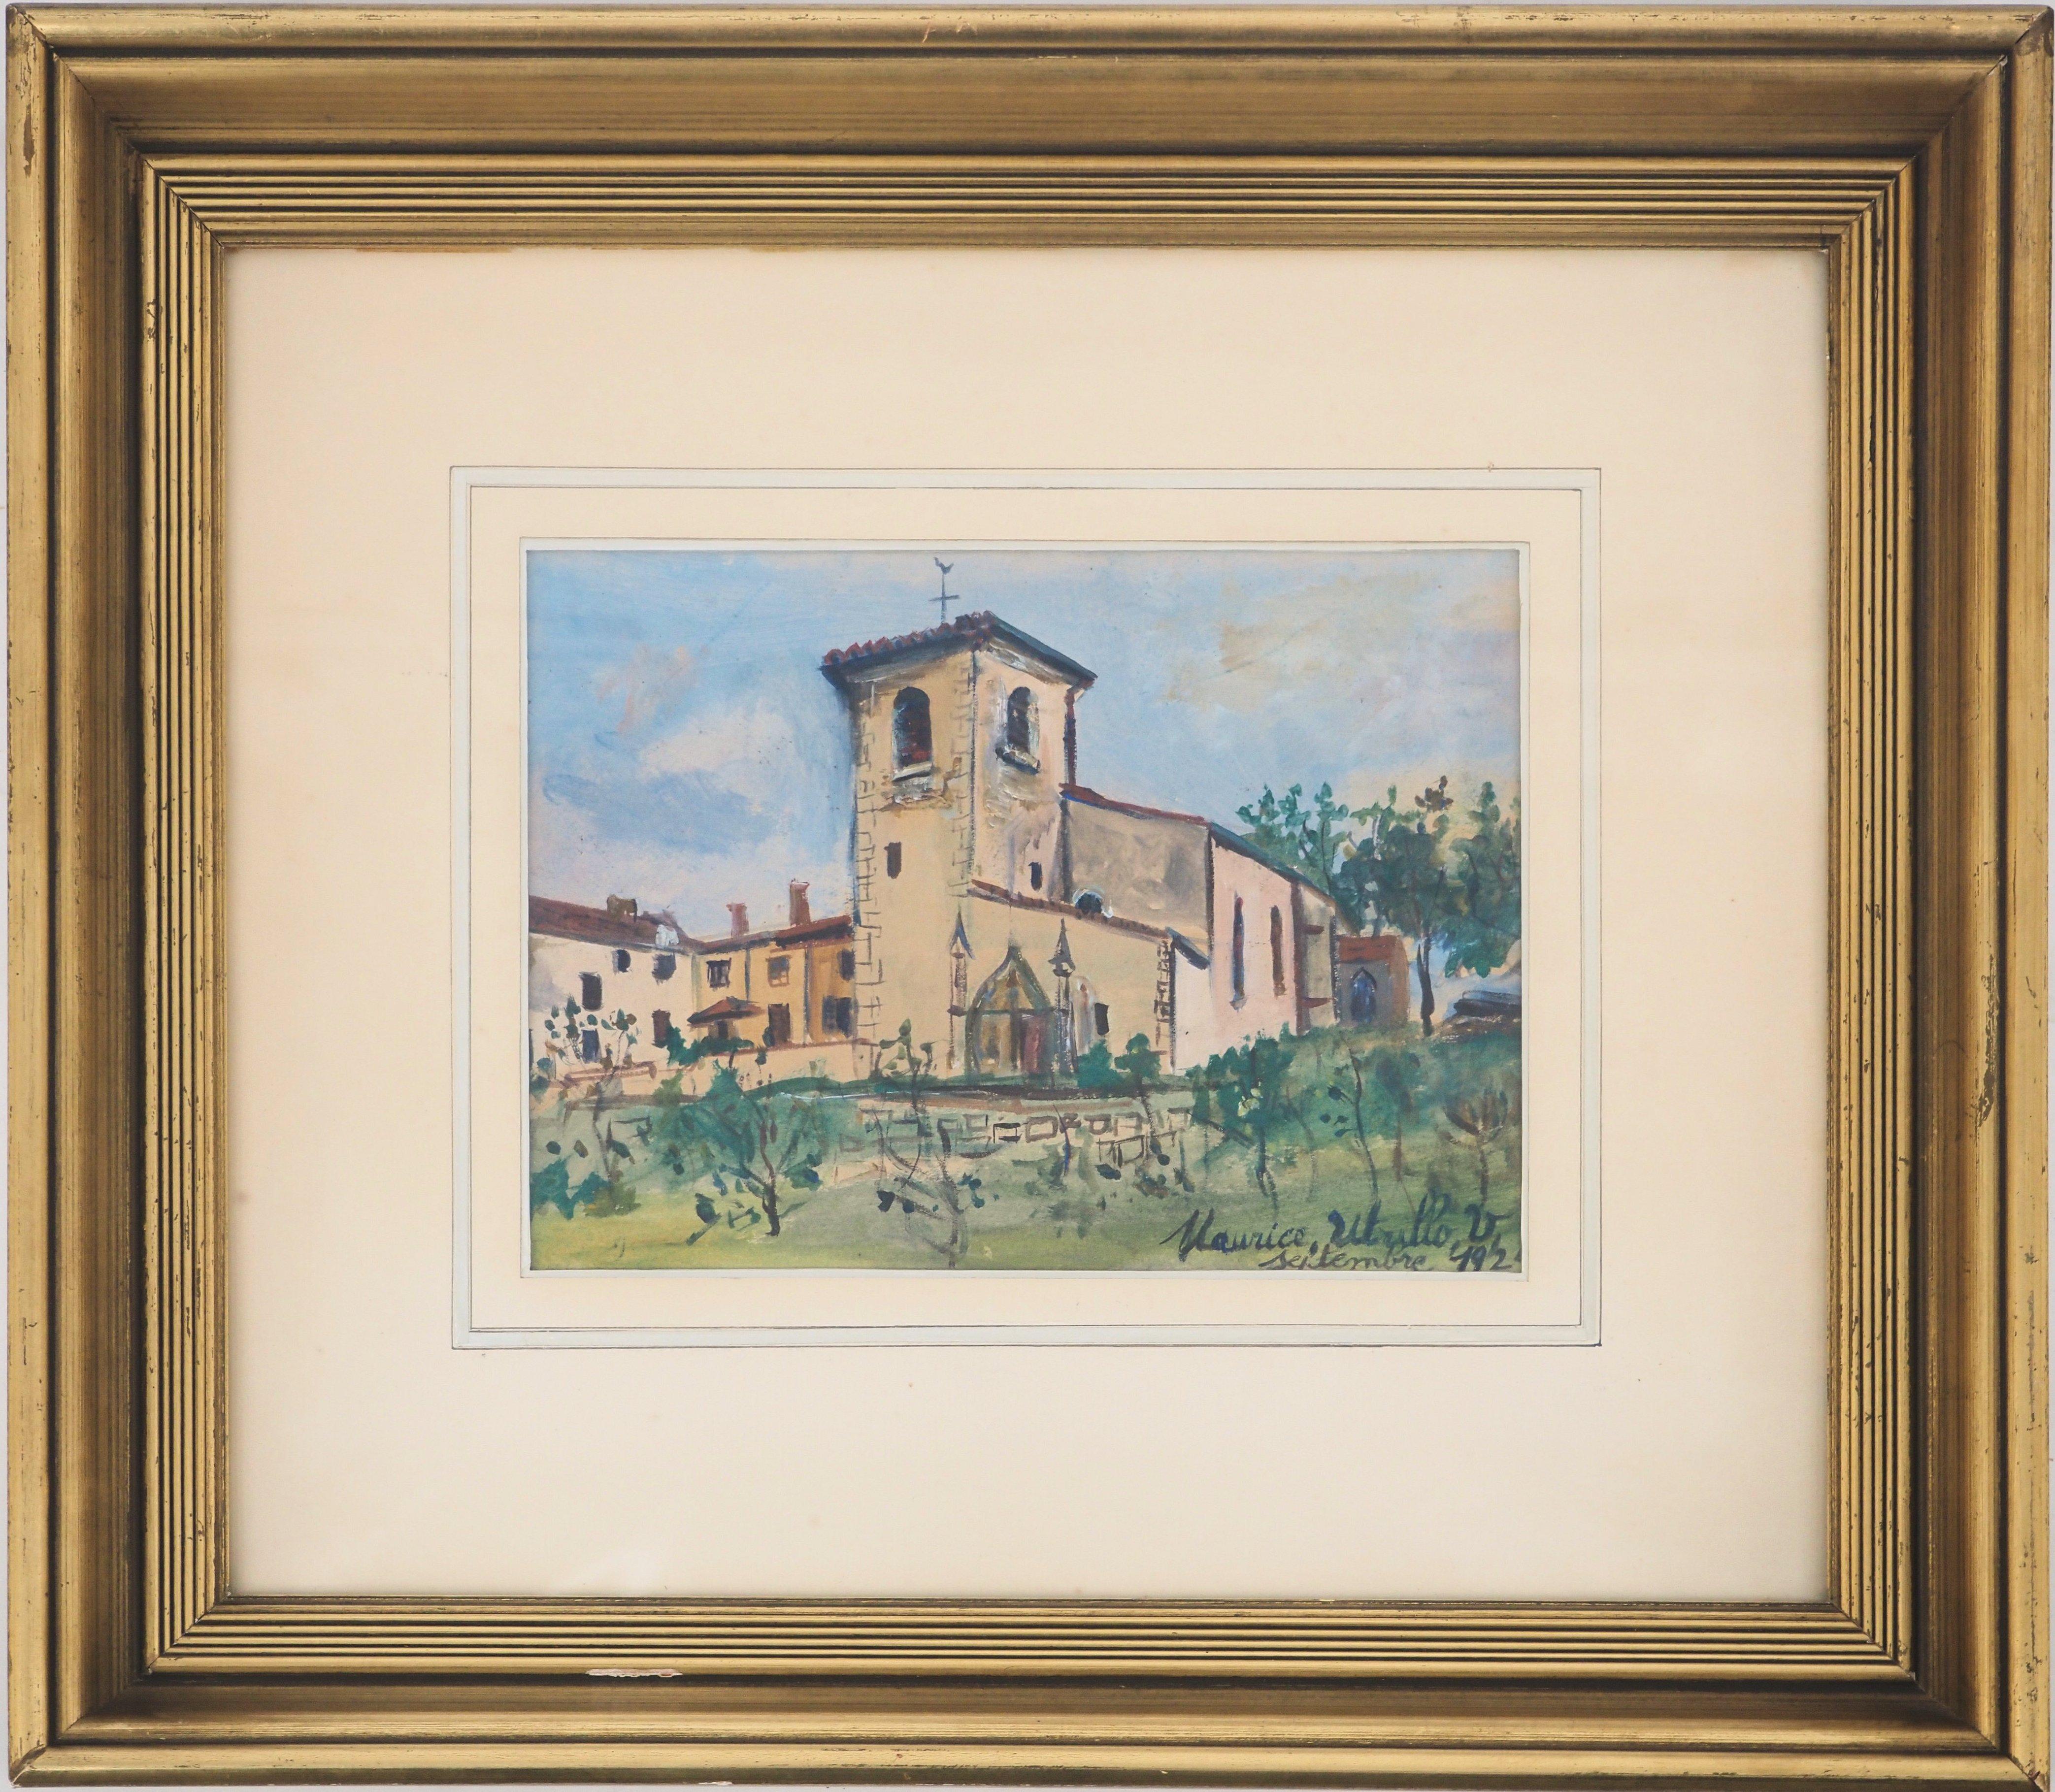 Church of St Bernard - Original gouache on paper, Handsigned - Painting by Maurice Utrillo